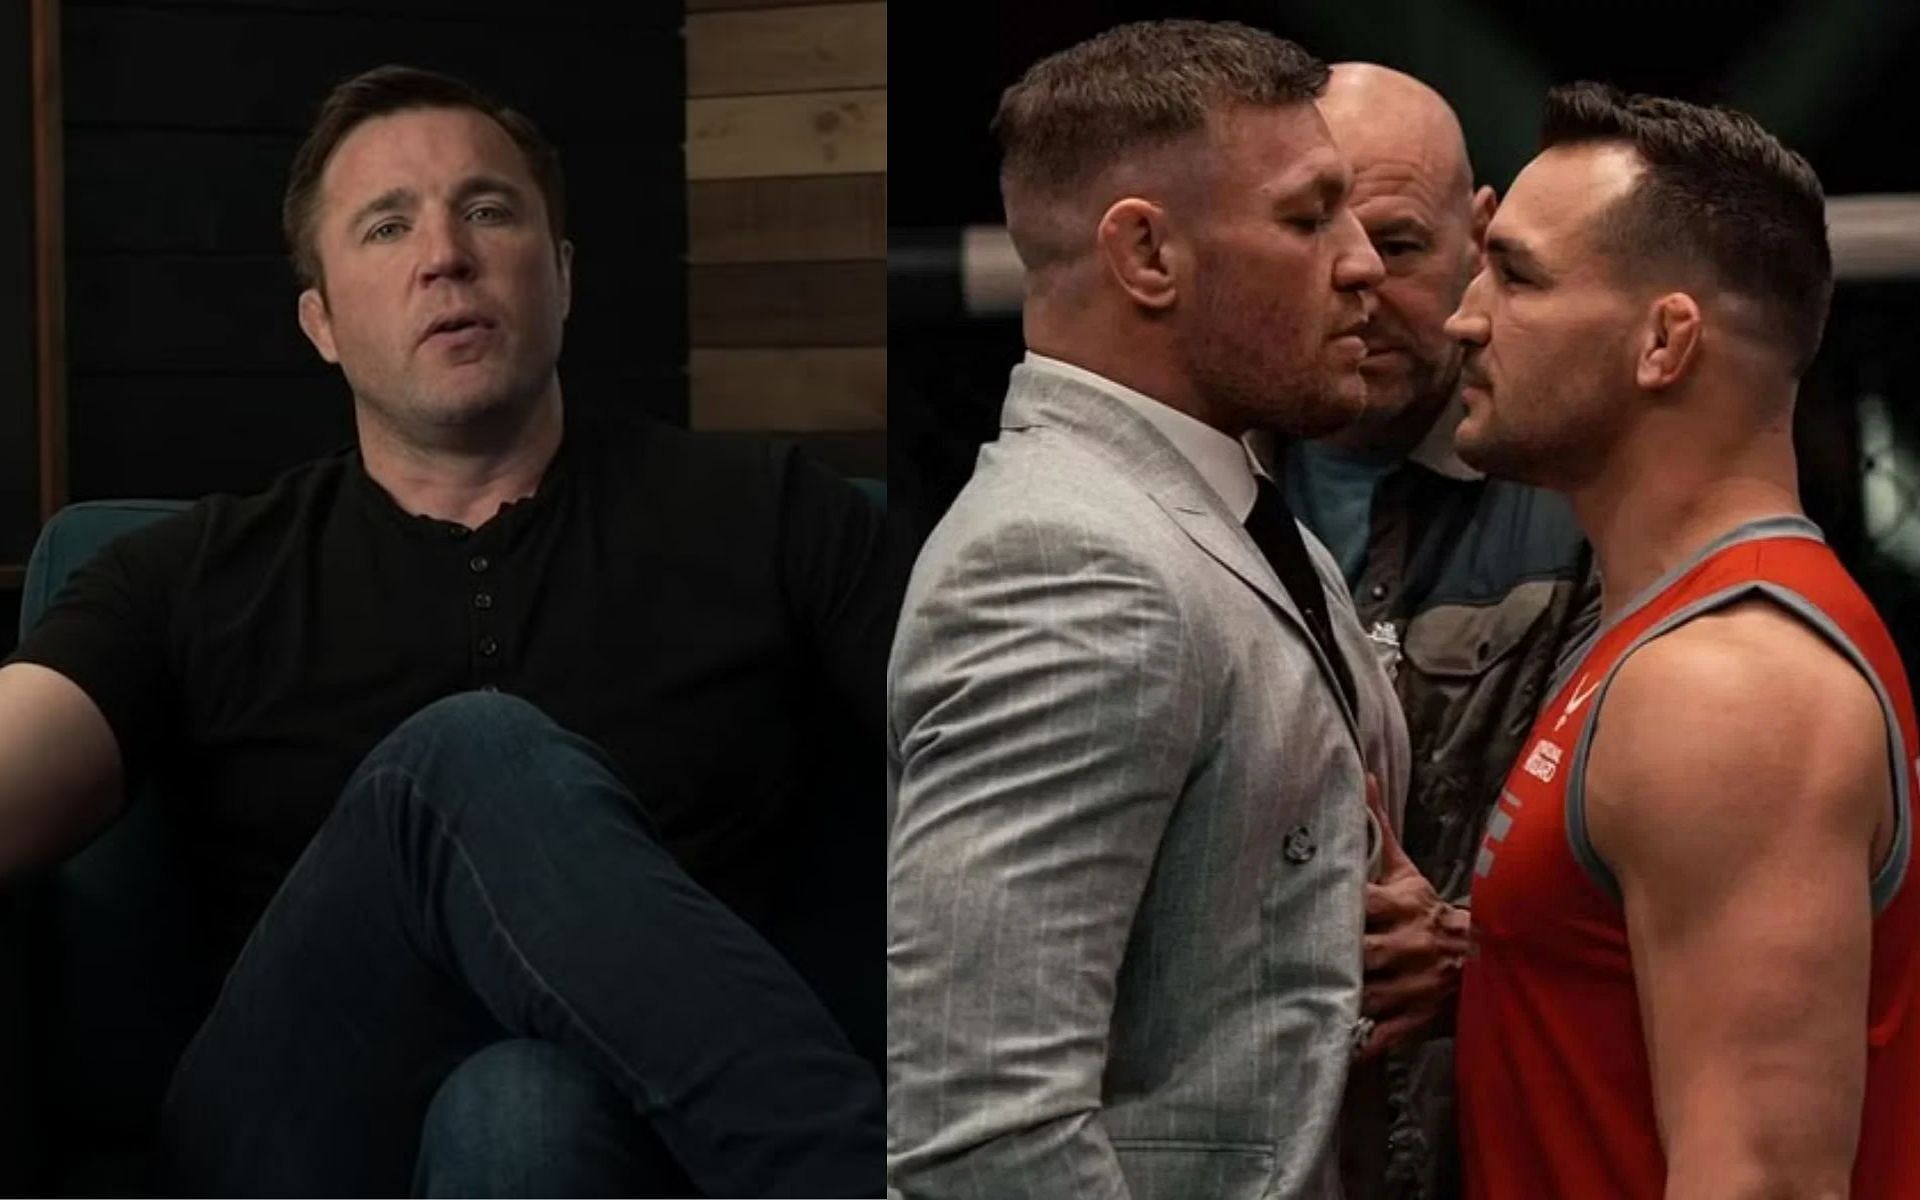 Chael Sonnen (left) and Conor McGregor vs Michael Chandler (right). [via @TheNotoriousMMA on X and Chael Sonnen on YouTube]